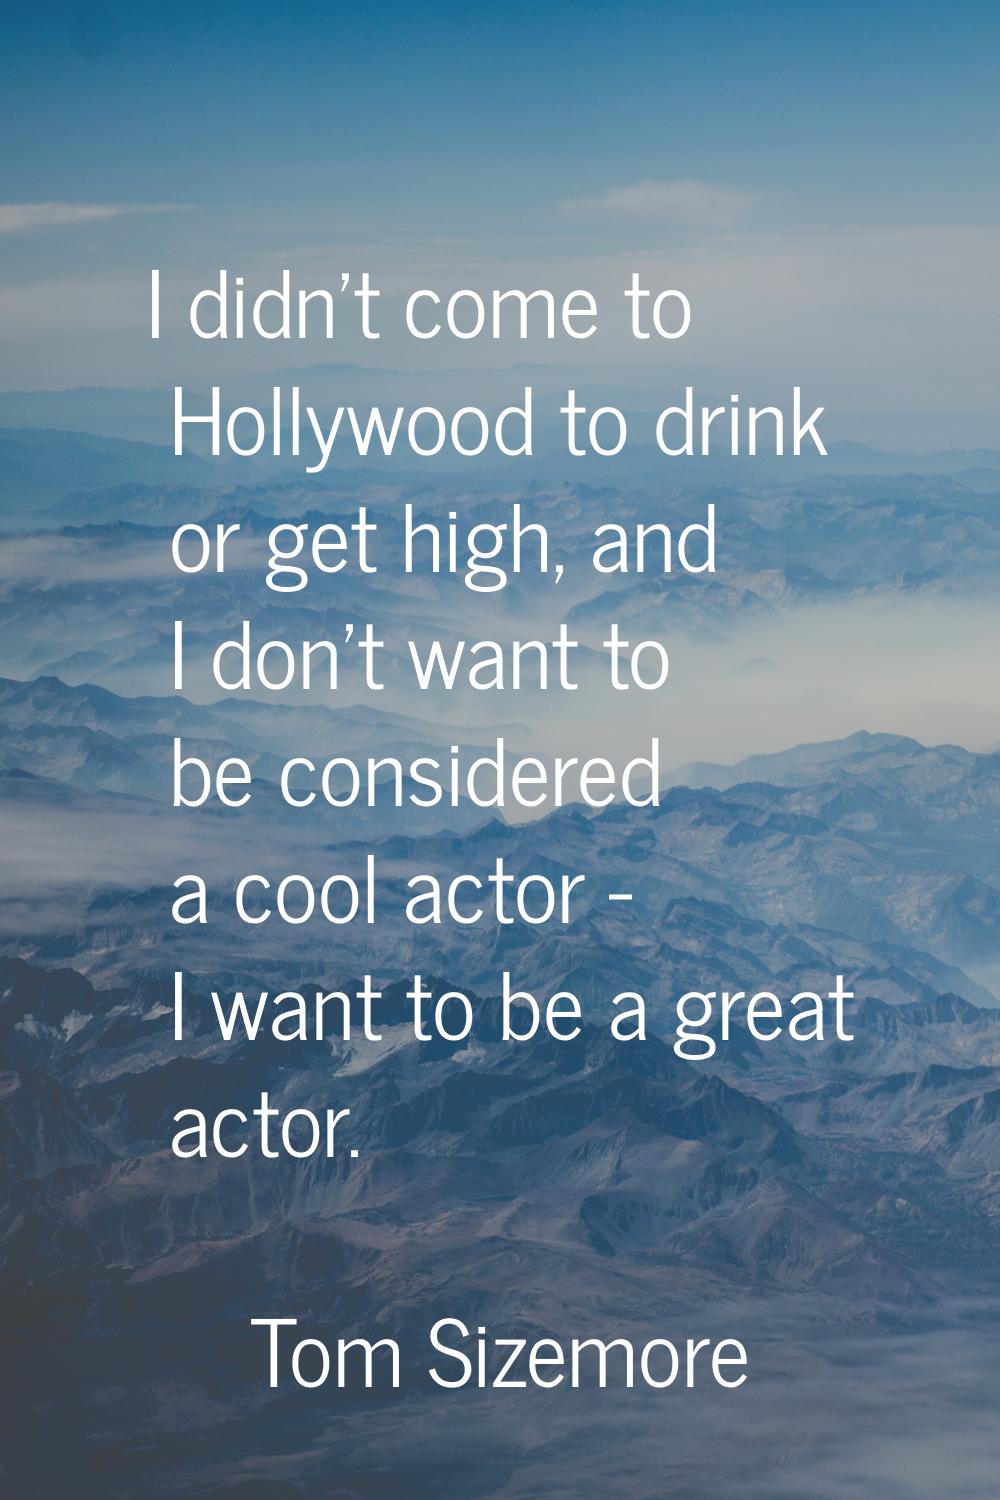 I didn't come to Hollywood to drink or get high, and I don't want to be considered a cool actor - I